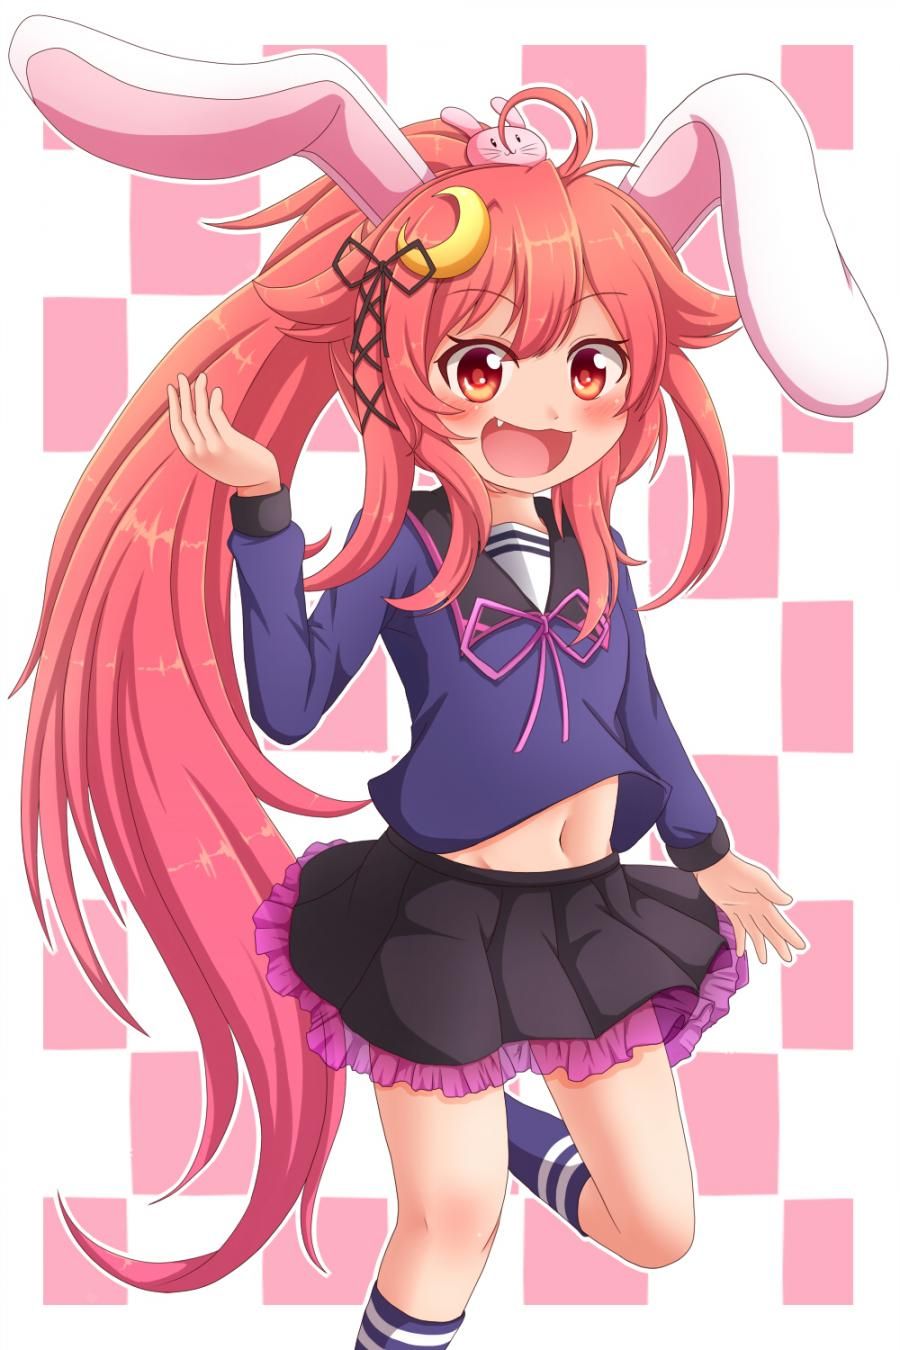 The second image of the bunny girl is too it. 29